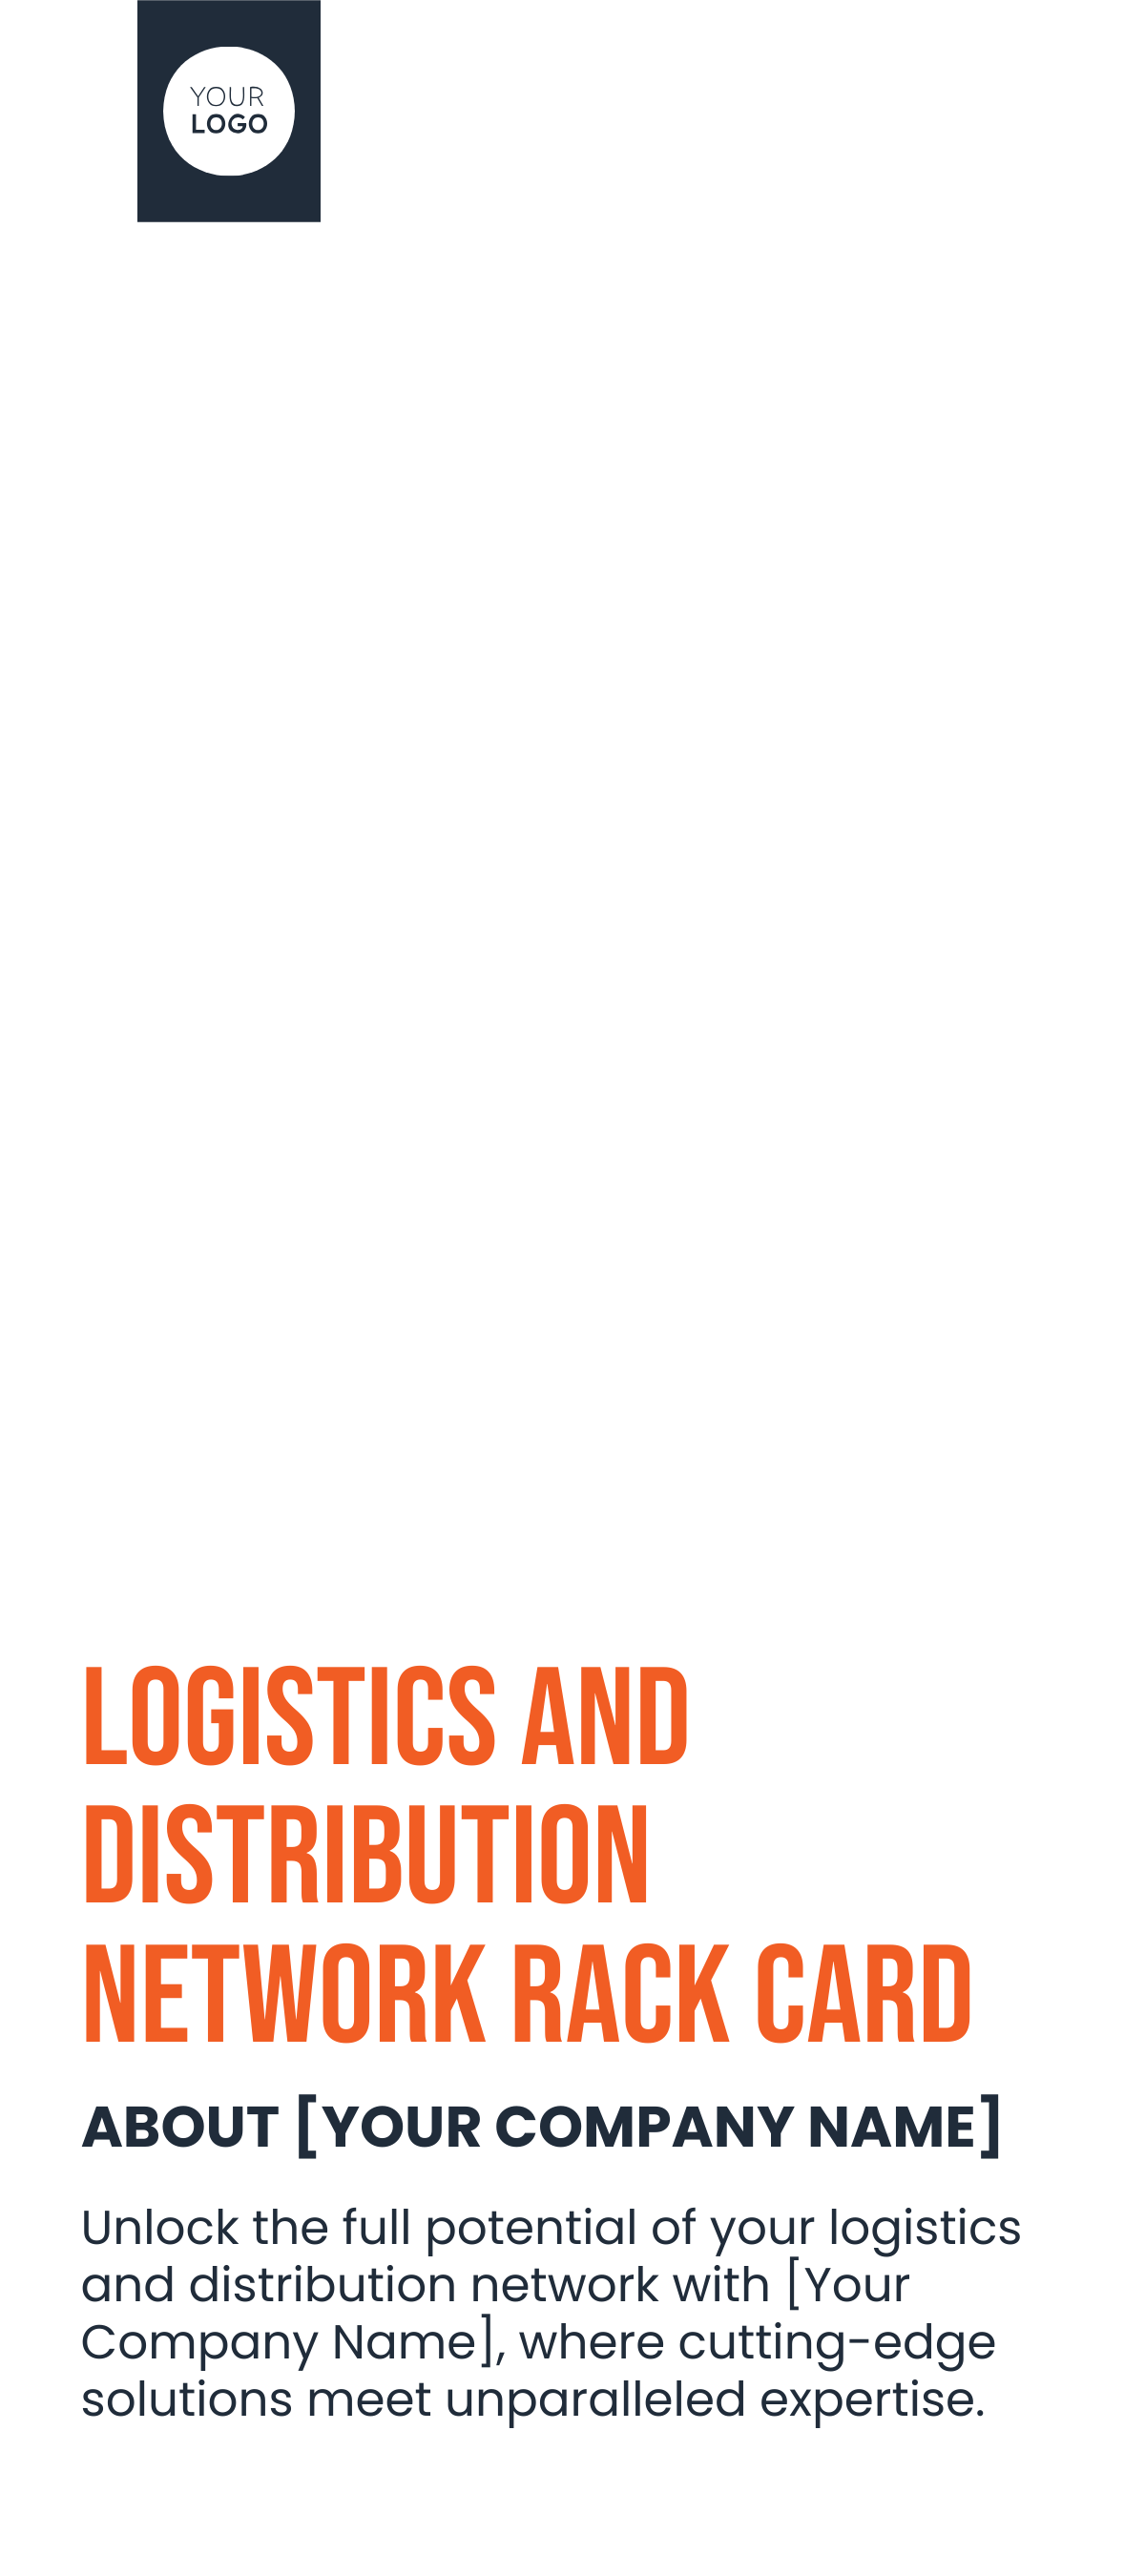 Free Logistics and Distribution Network Rack Card Template